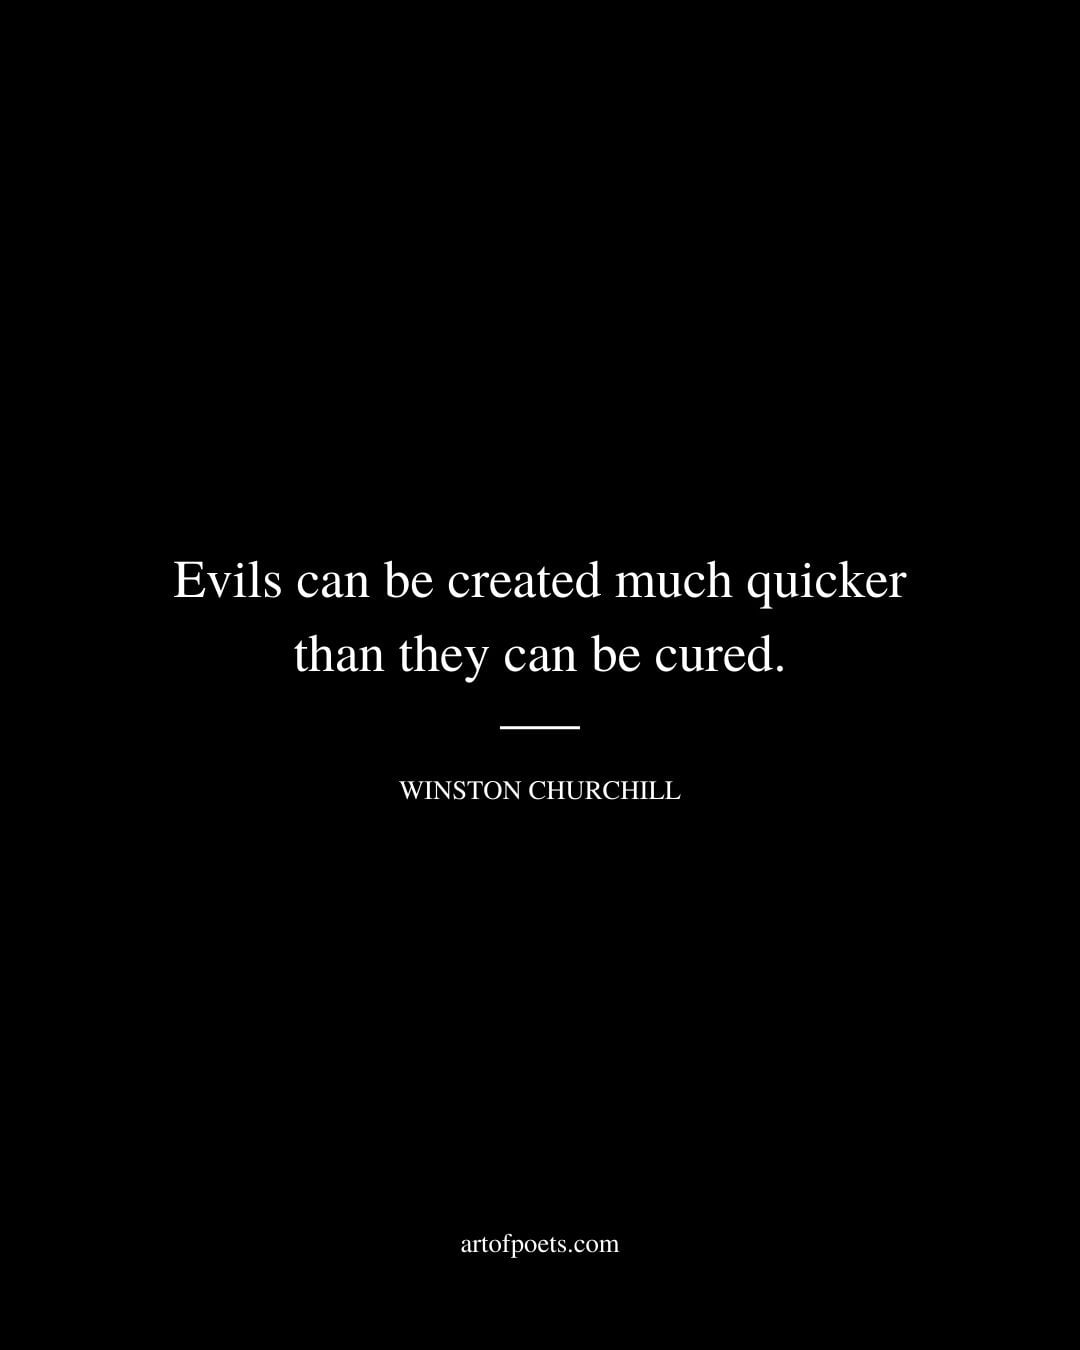 Evils can be created much quicker than they can be cured